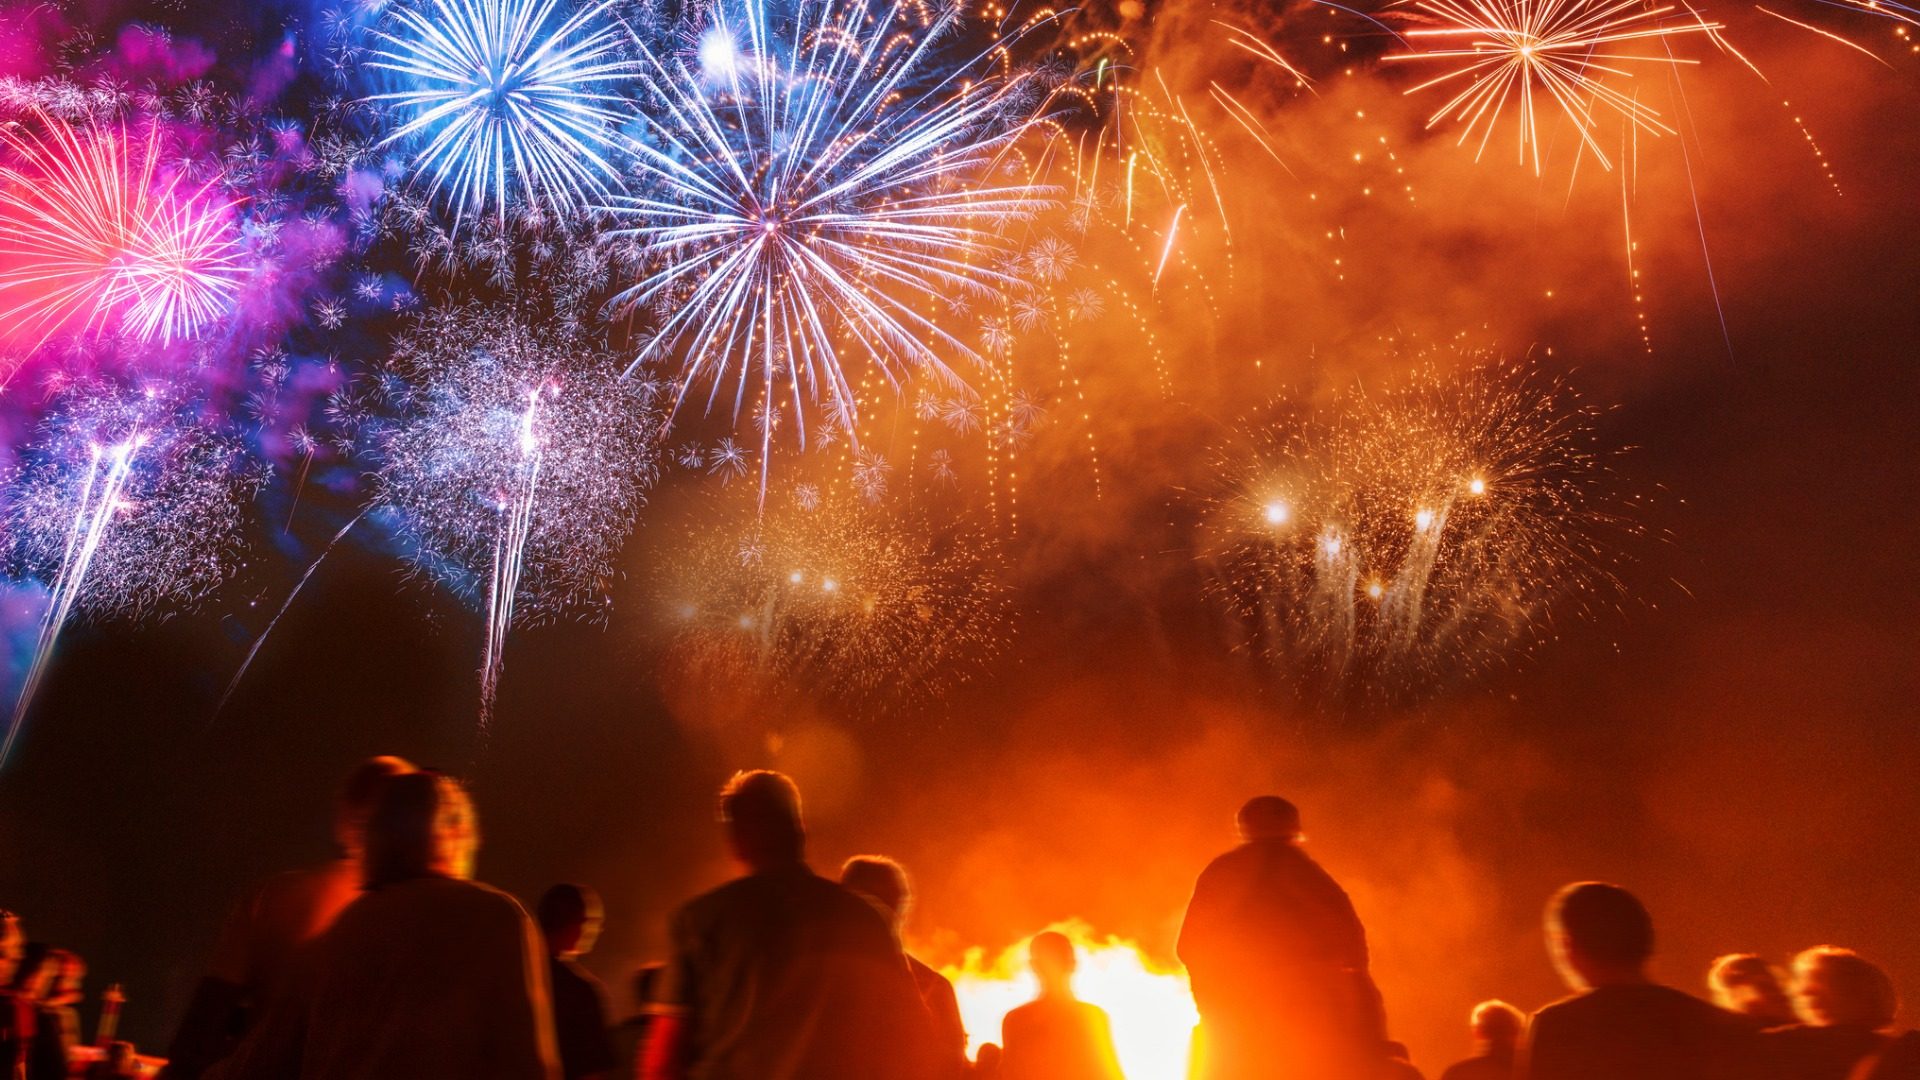 Fireworks are a holiday tradition and captivate crowds, but there are some environmental downsides. (Stock photo)